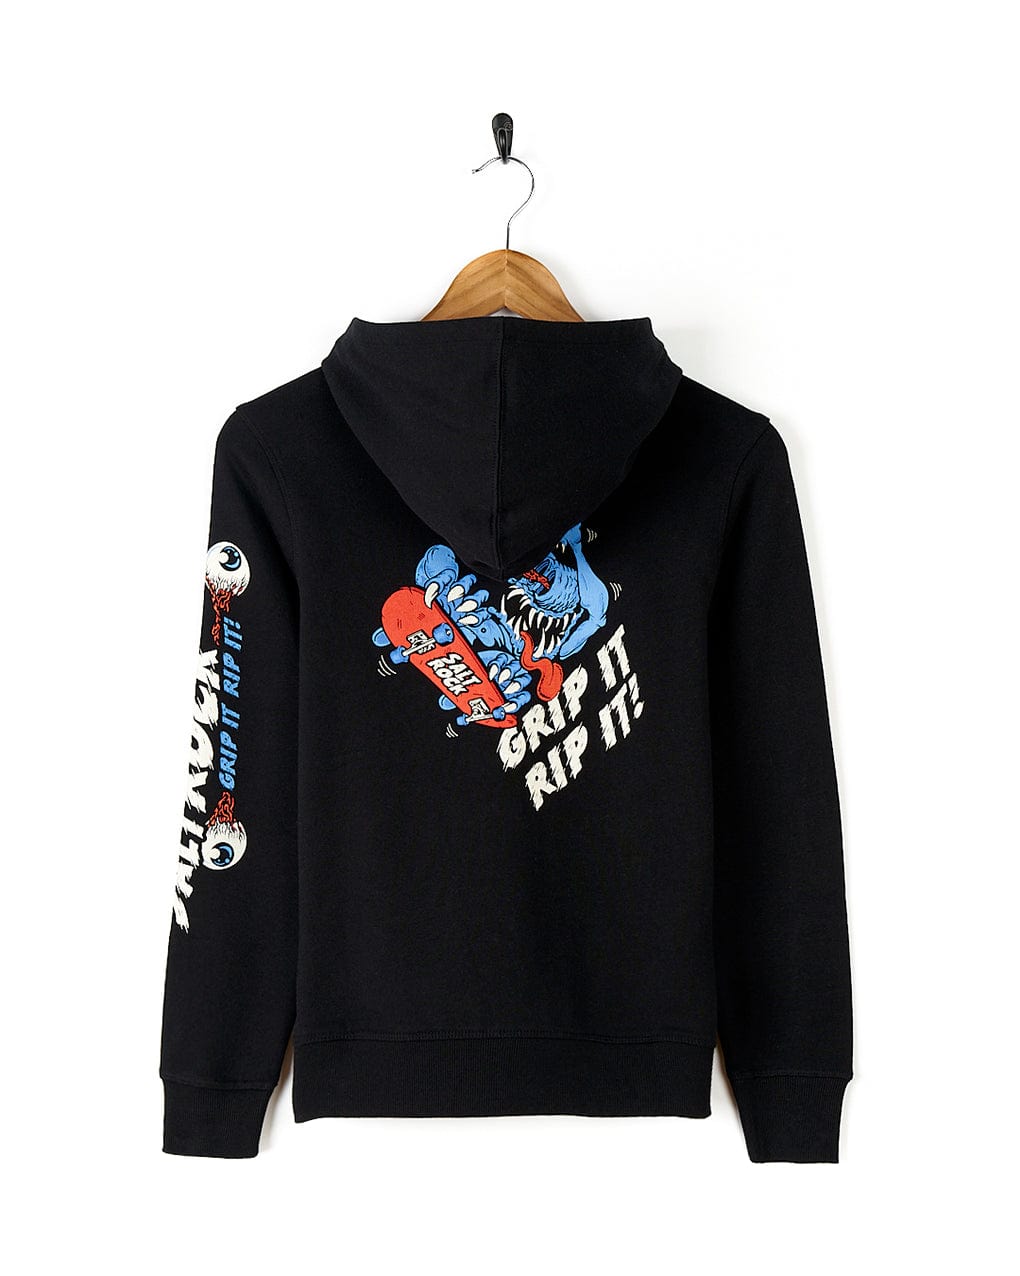 The Creepshow - Kids Pop Hoodie - Black featuring Saltrock branding is a stylish apparel option for those seeking adventure. With its dynamic blue and red design, this black hoodie adds a touch of edge to any.